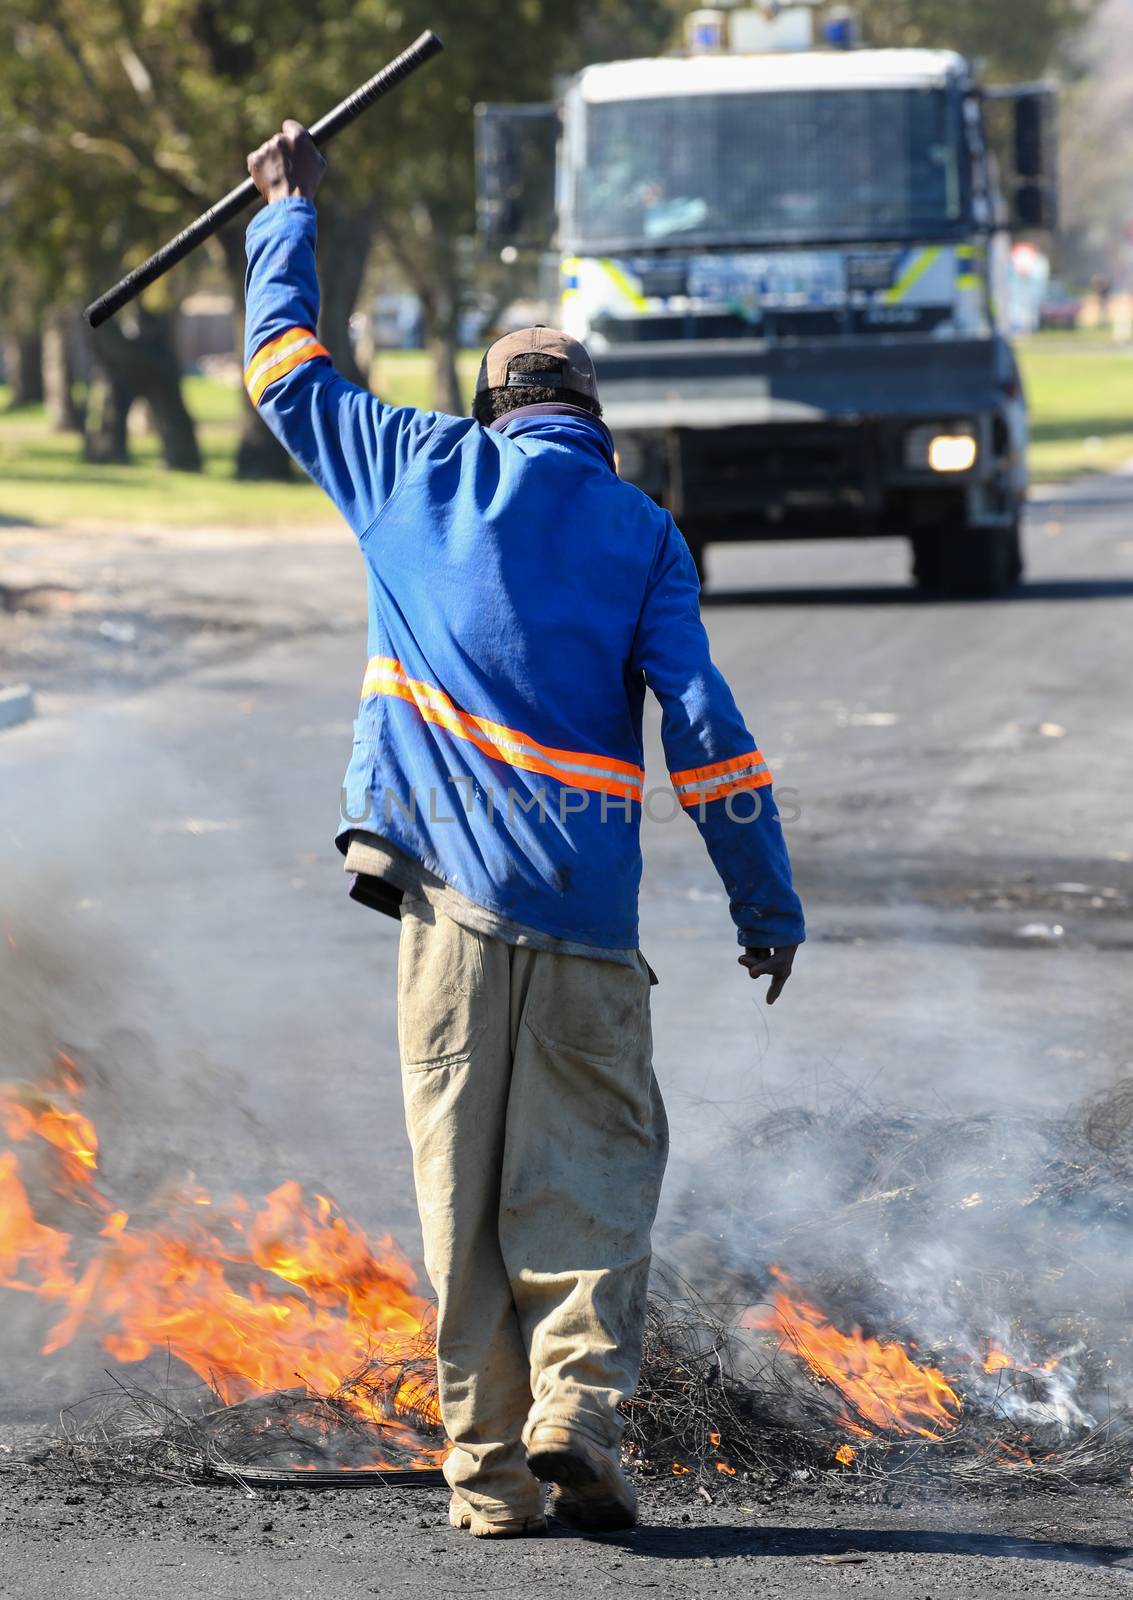 Protest Action with Burning Tyres by fouroaks